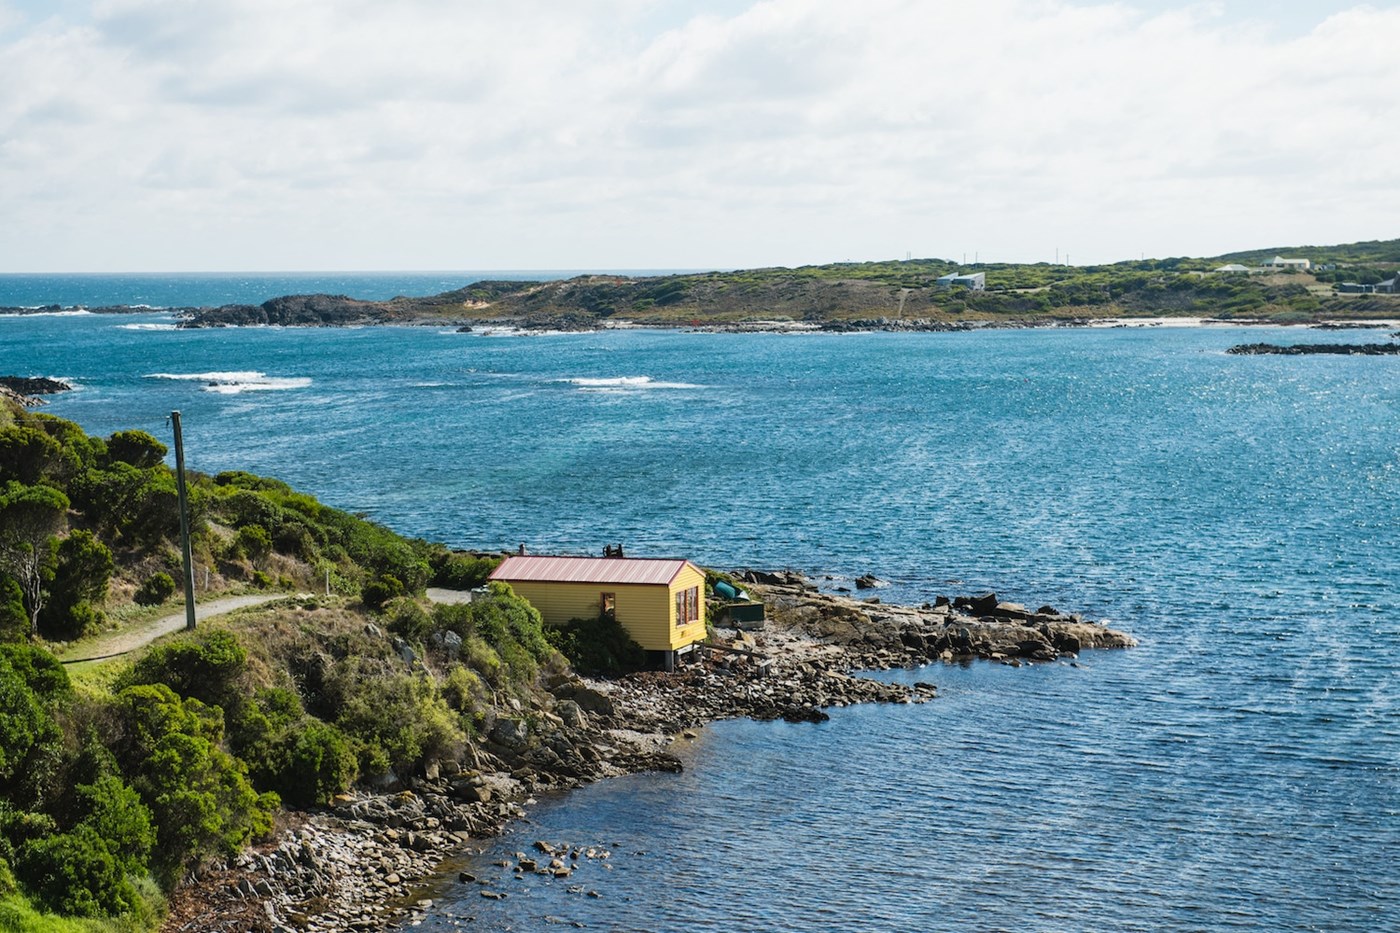 A small yellow shack on the end of a winding road, overlooking the ocean.